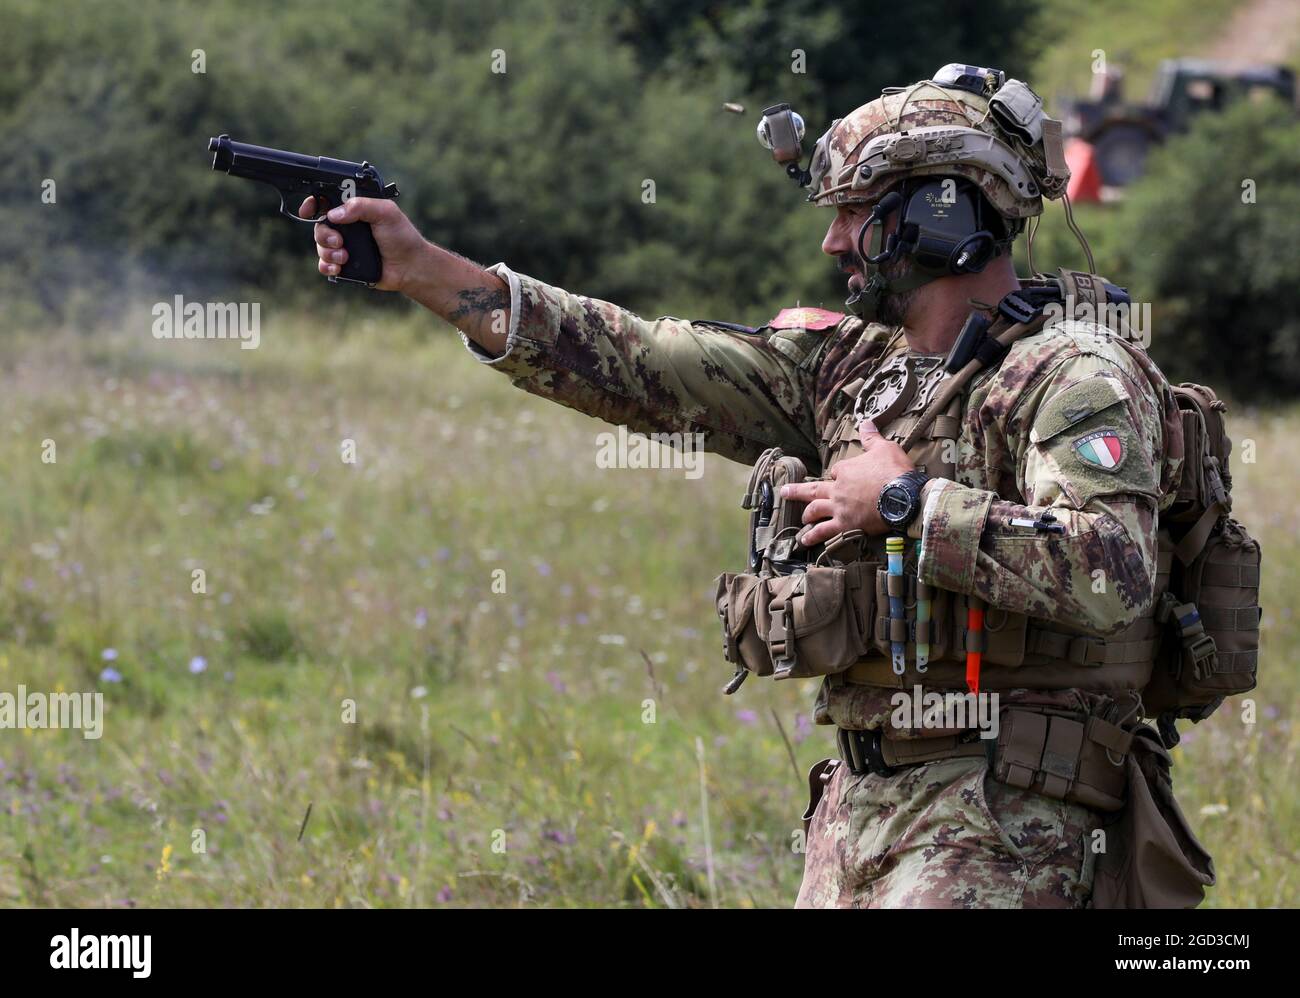 An Italian sniper competitor fires his pistol at paper targets during the Mogadishu event on Hohenfels Training Area Germany, Aug. 9, 2021. The 2021 European Best Sniper Team Competition is a U.S. Army Europe and Africa-directed, 7th Army Training Command hosted contest of skill that includes 14 participating NATO allies and partner nations at 7th ATC’s Hohenfels Training Area, Aug 8-14. (U.S. Army  photo by Spc. Zack Stahlberg) Stock Photo